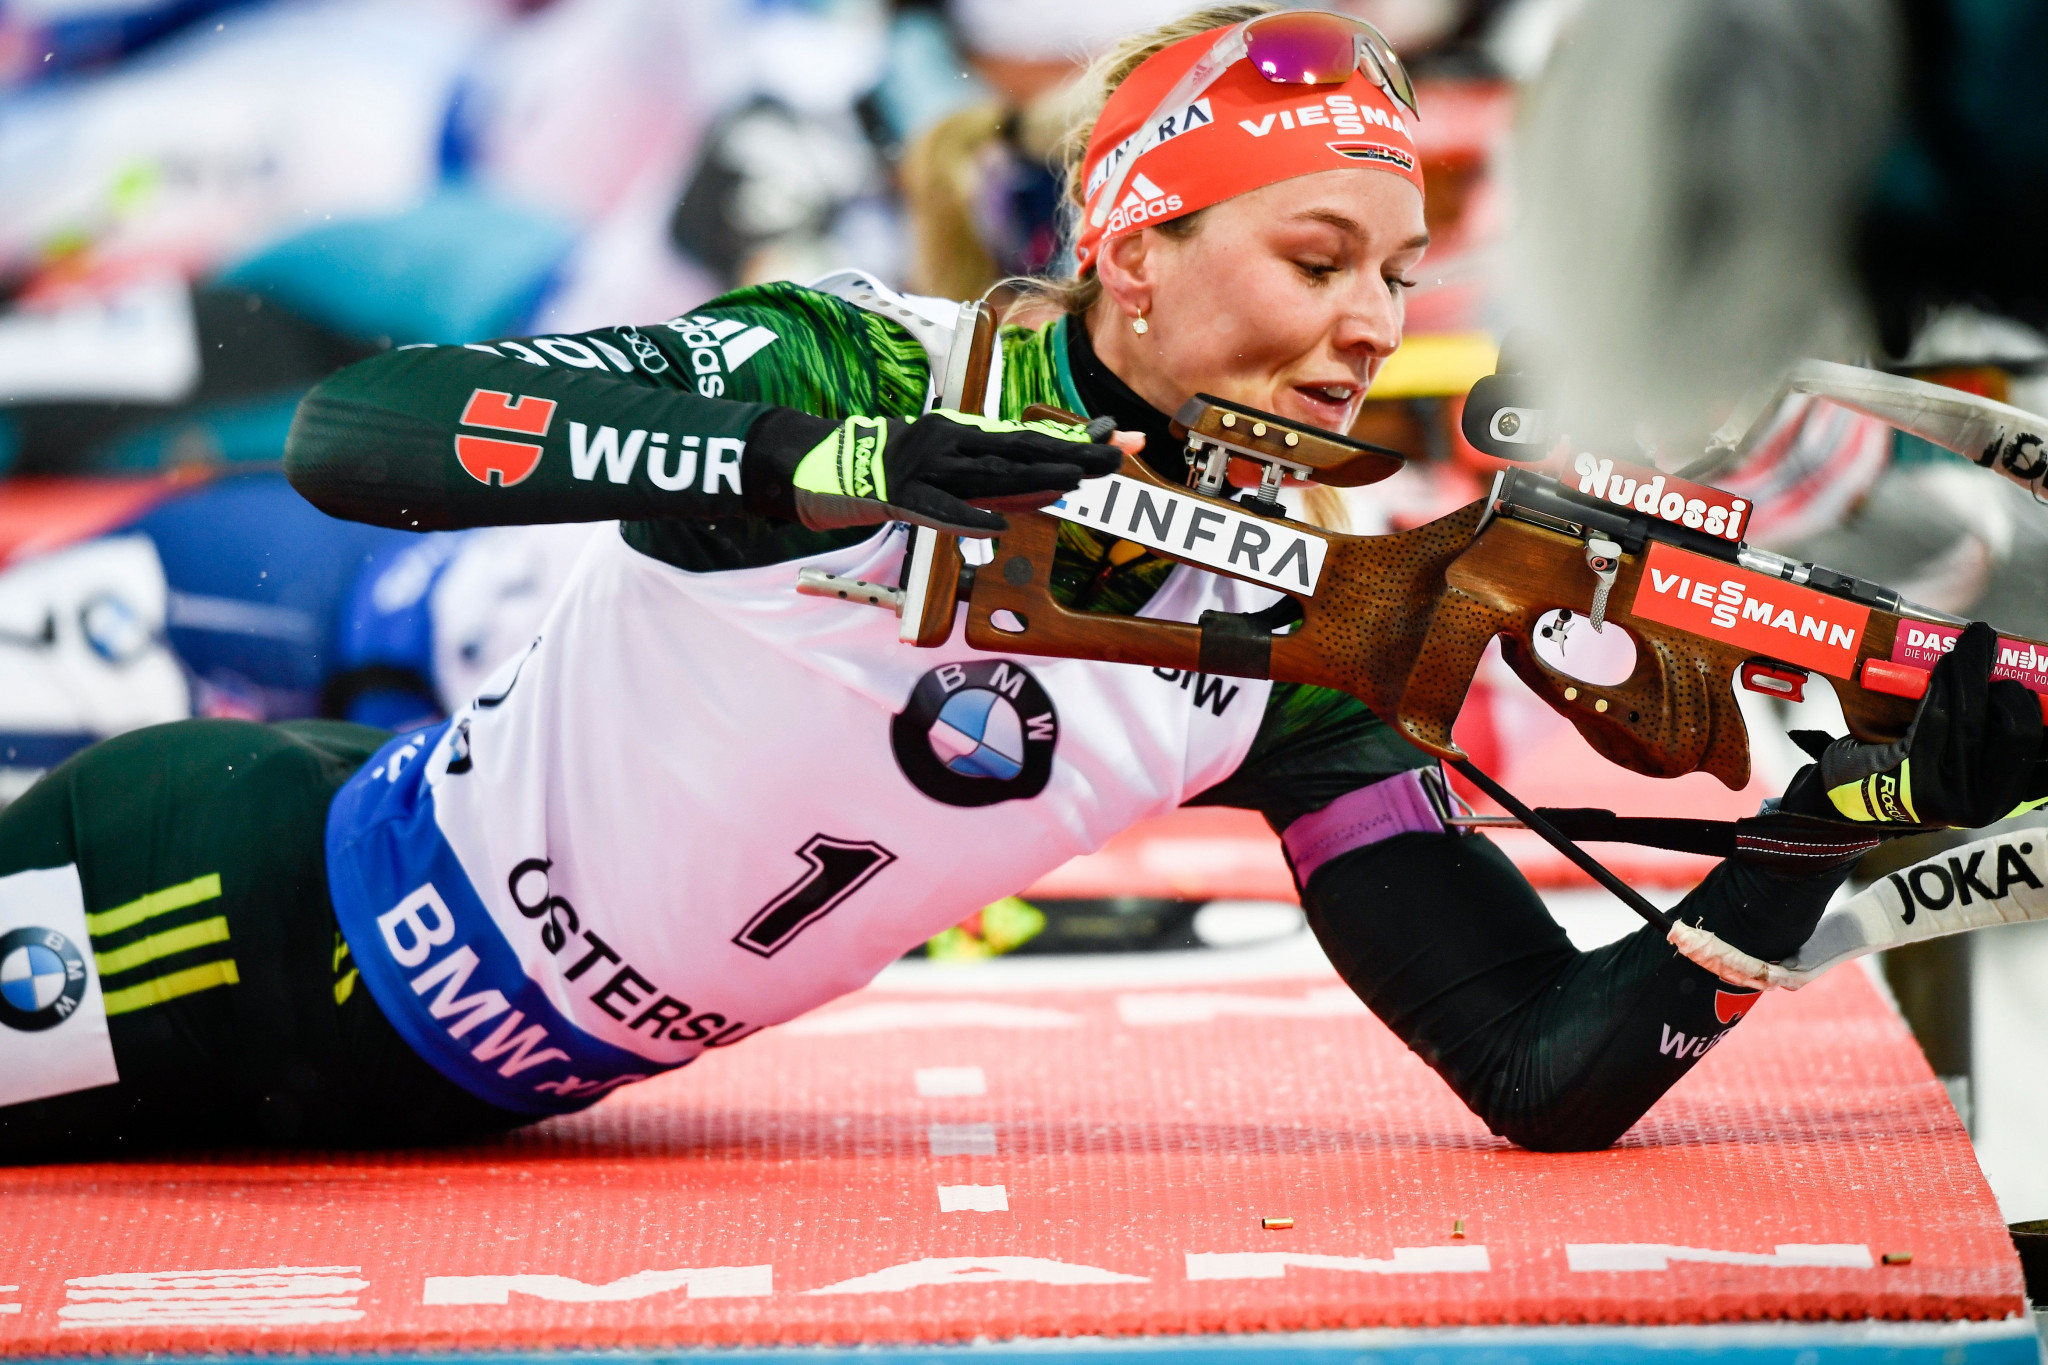 Germany's Denise Herrmann secured her second straight victory in Östersund by winning the women's pursuit ©Getty Images